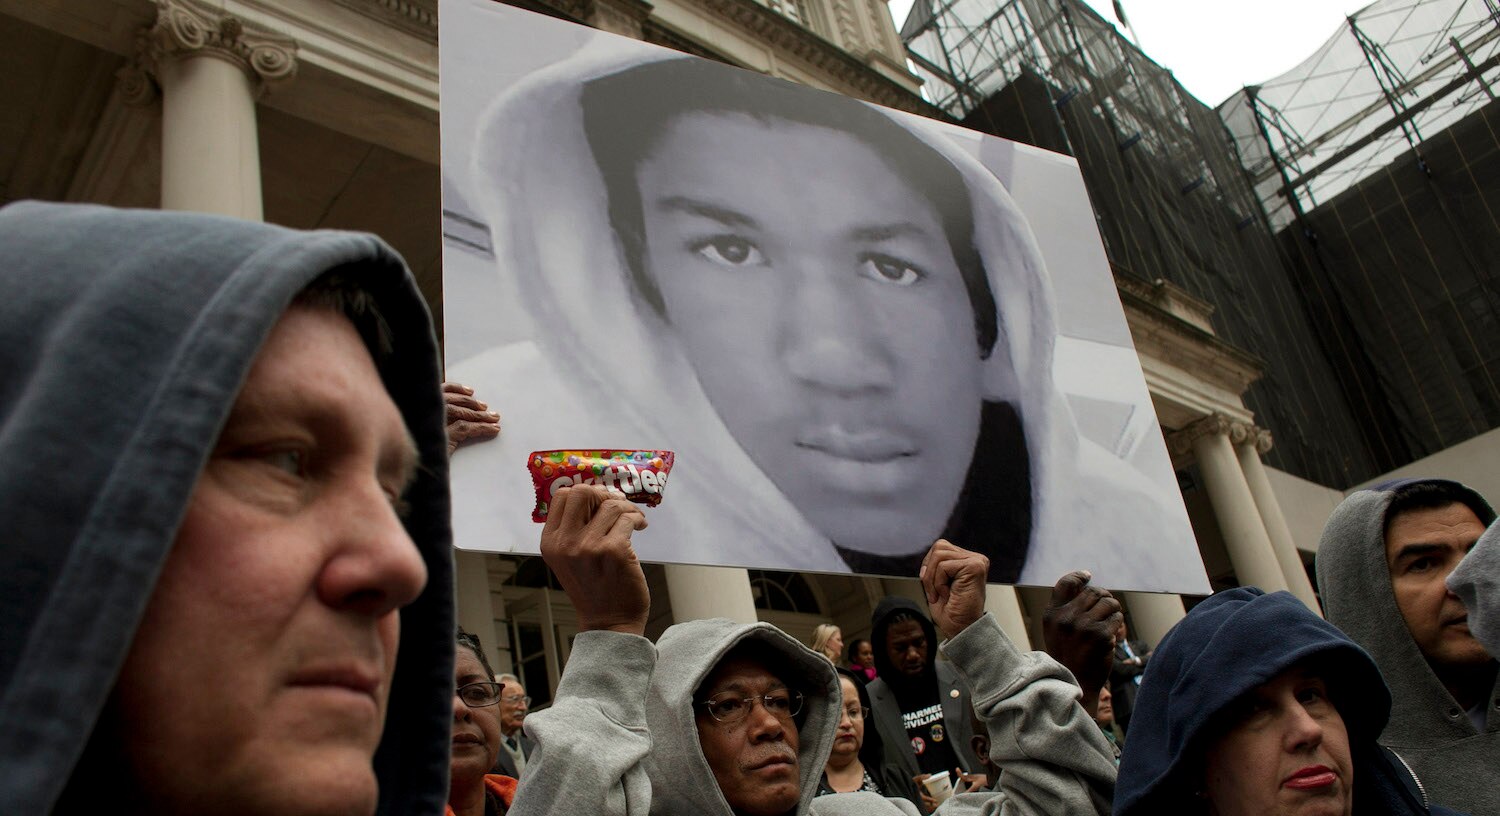 Official Trailer Of Trayvon Martin Docuseries Released | Very Real1500 x 816